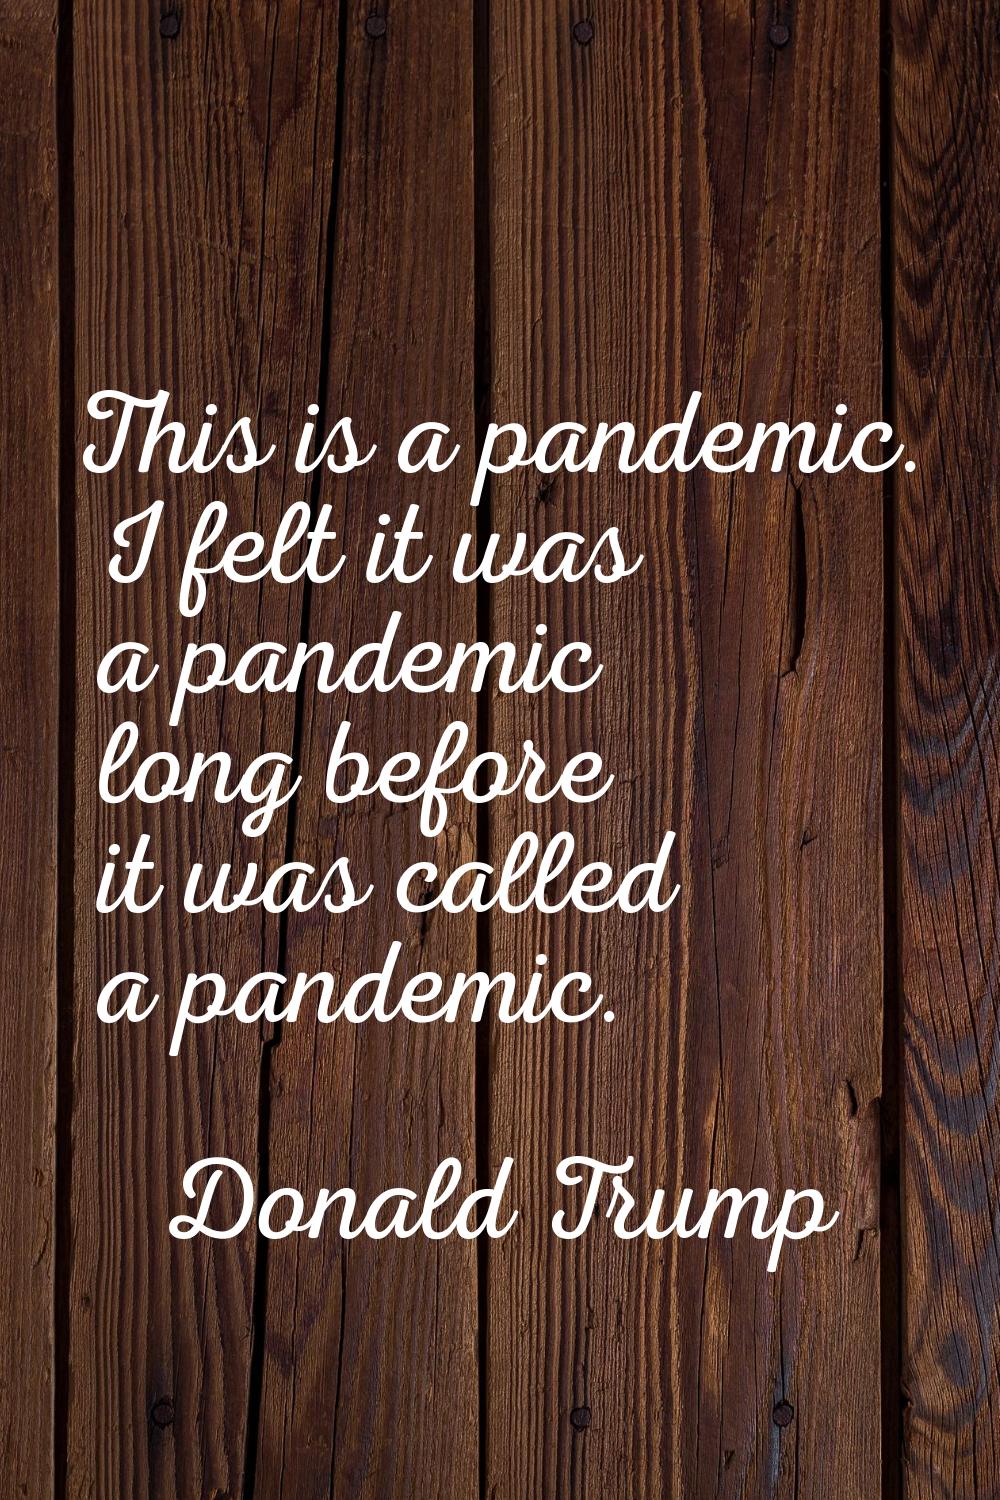 This is a pandemic. I felt it was a pandemic long before it was called a pandemic.